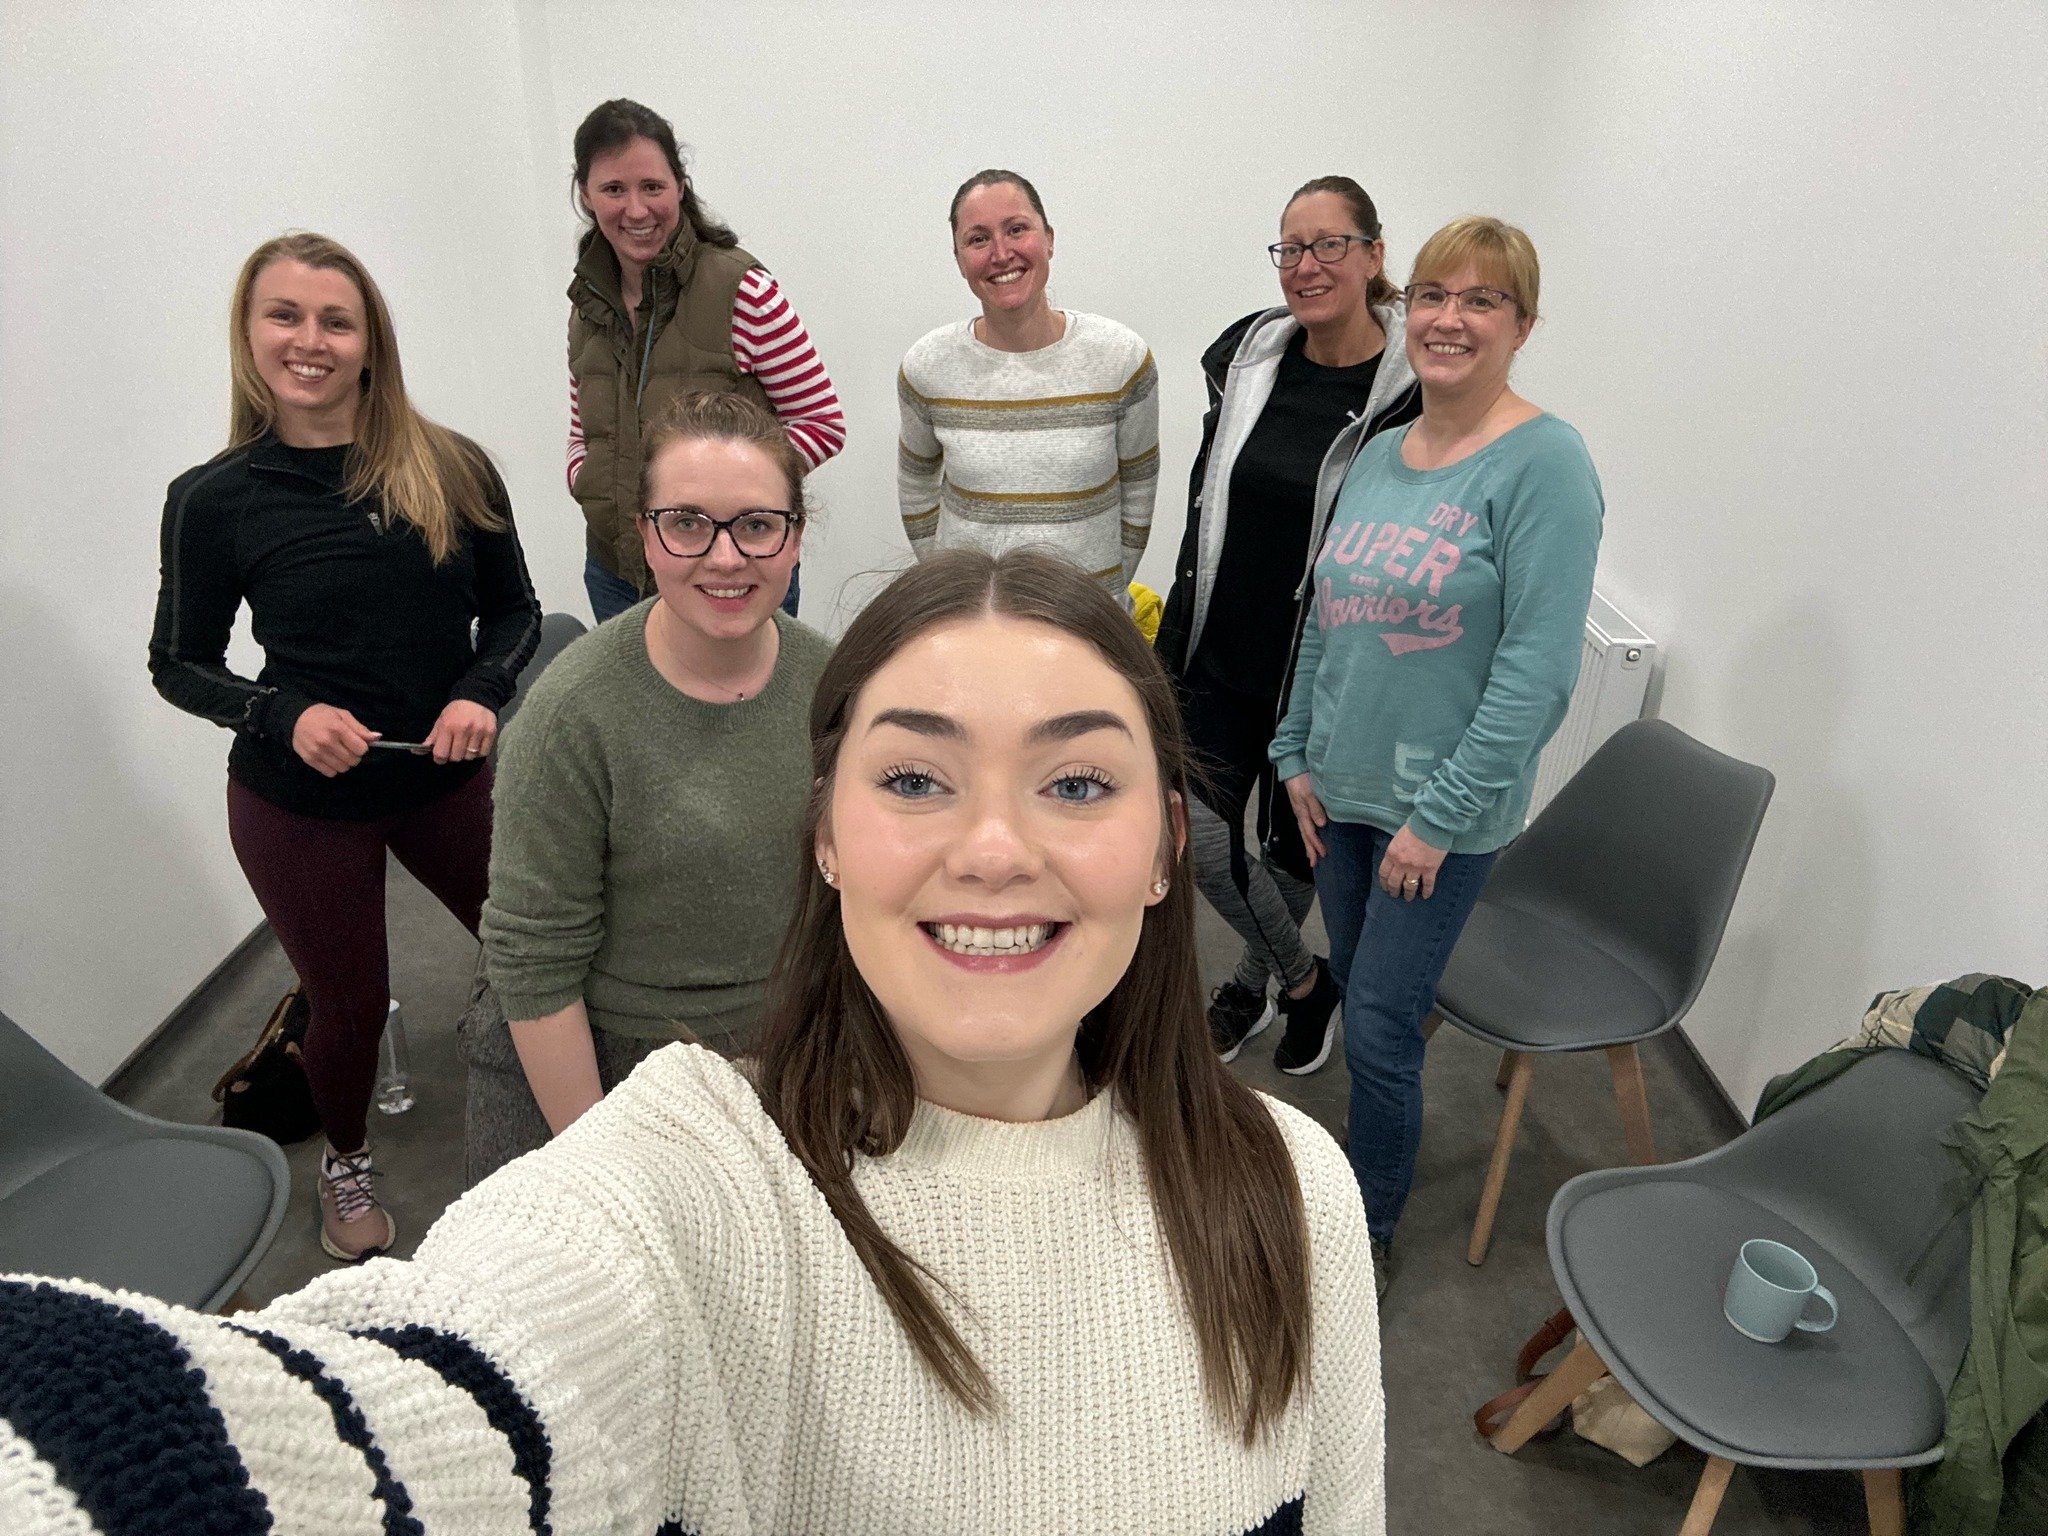 Our team meetings are a key part of ensuring that clinic runs smoothly. 

We have these meetings every quarter and it&rsquo;s a great time for team to get together, check in on business goals, update on clinic services and grab a coffee and cake!

Th